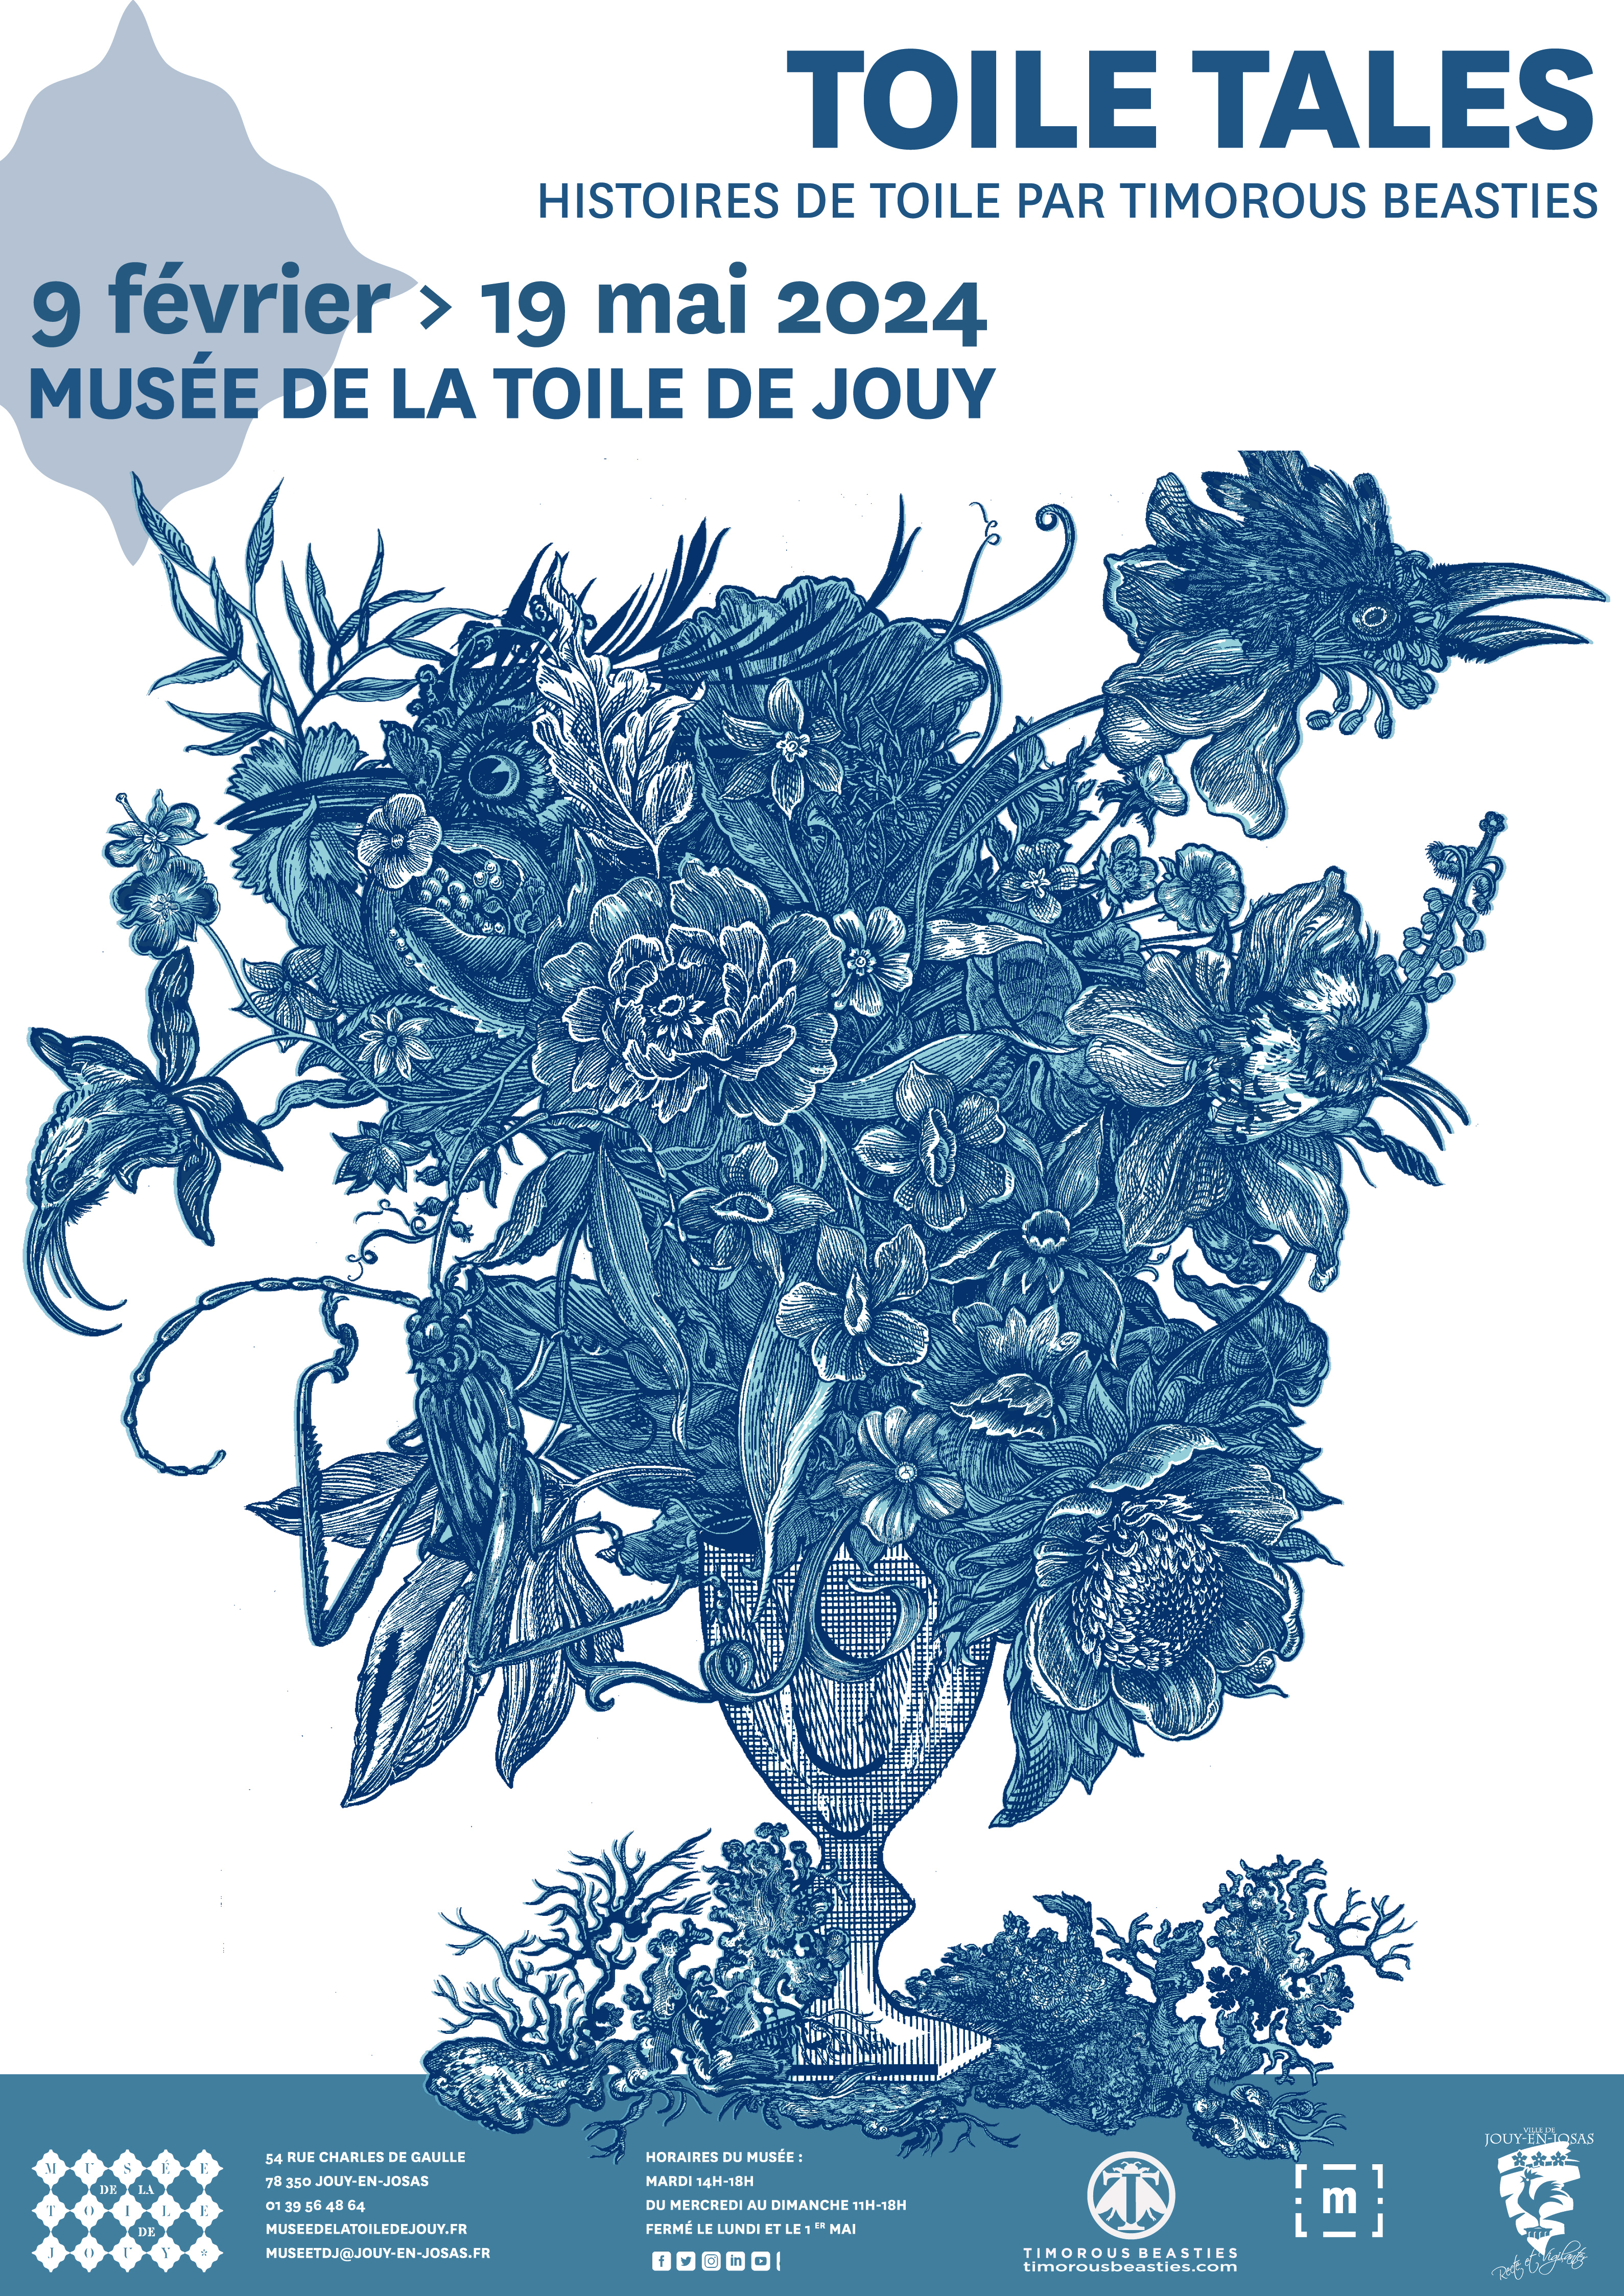 Toile tales (1/1)